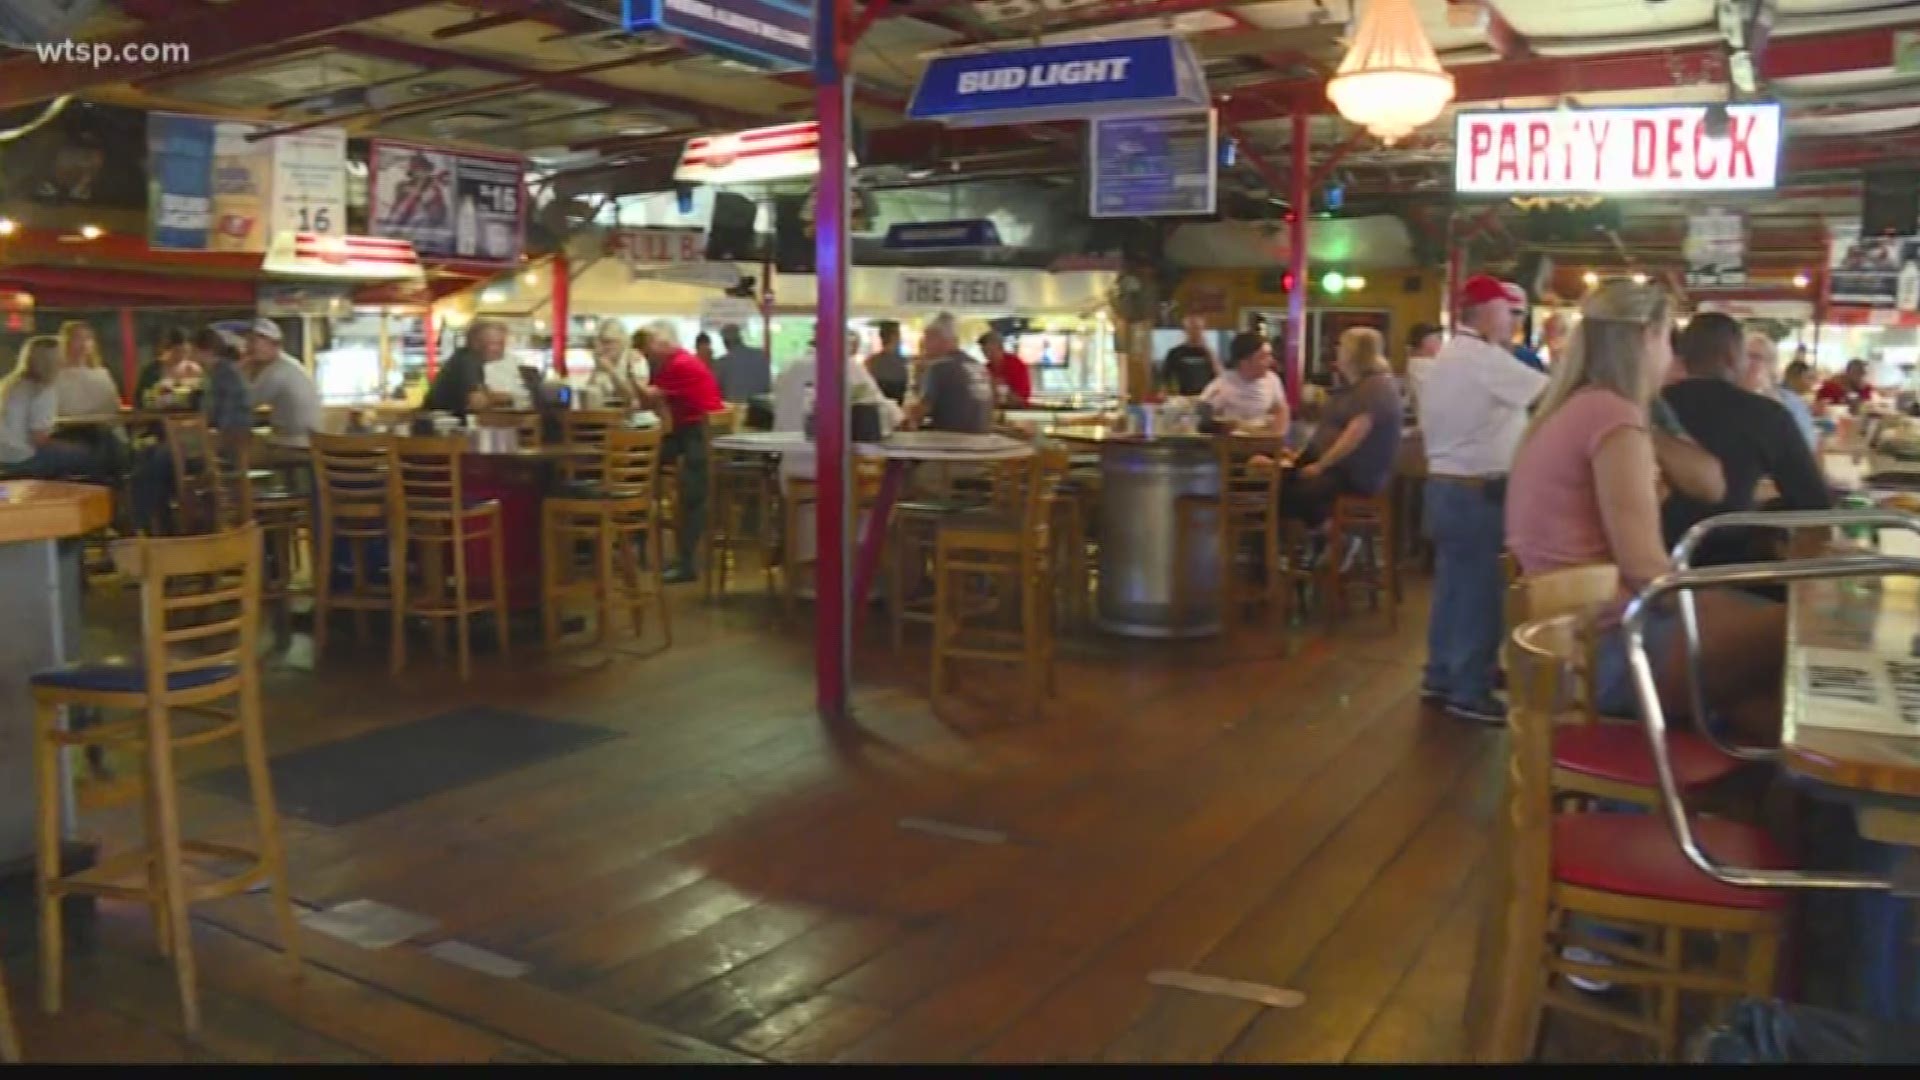 Local bars and restaurants say they're concerned about the impact canceled sporting events could have on their business.